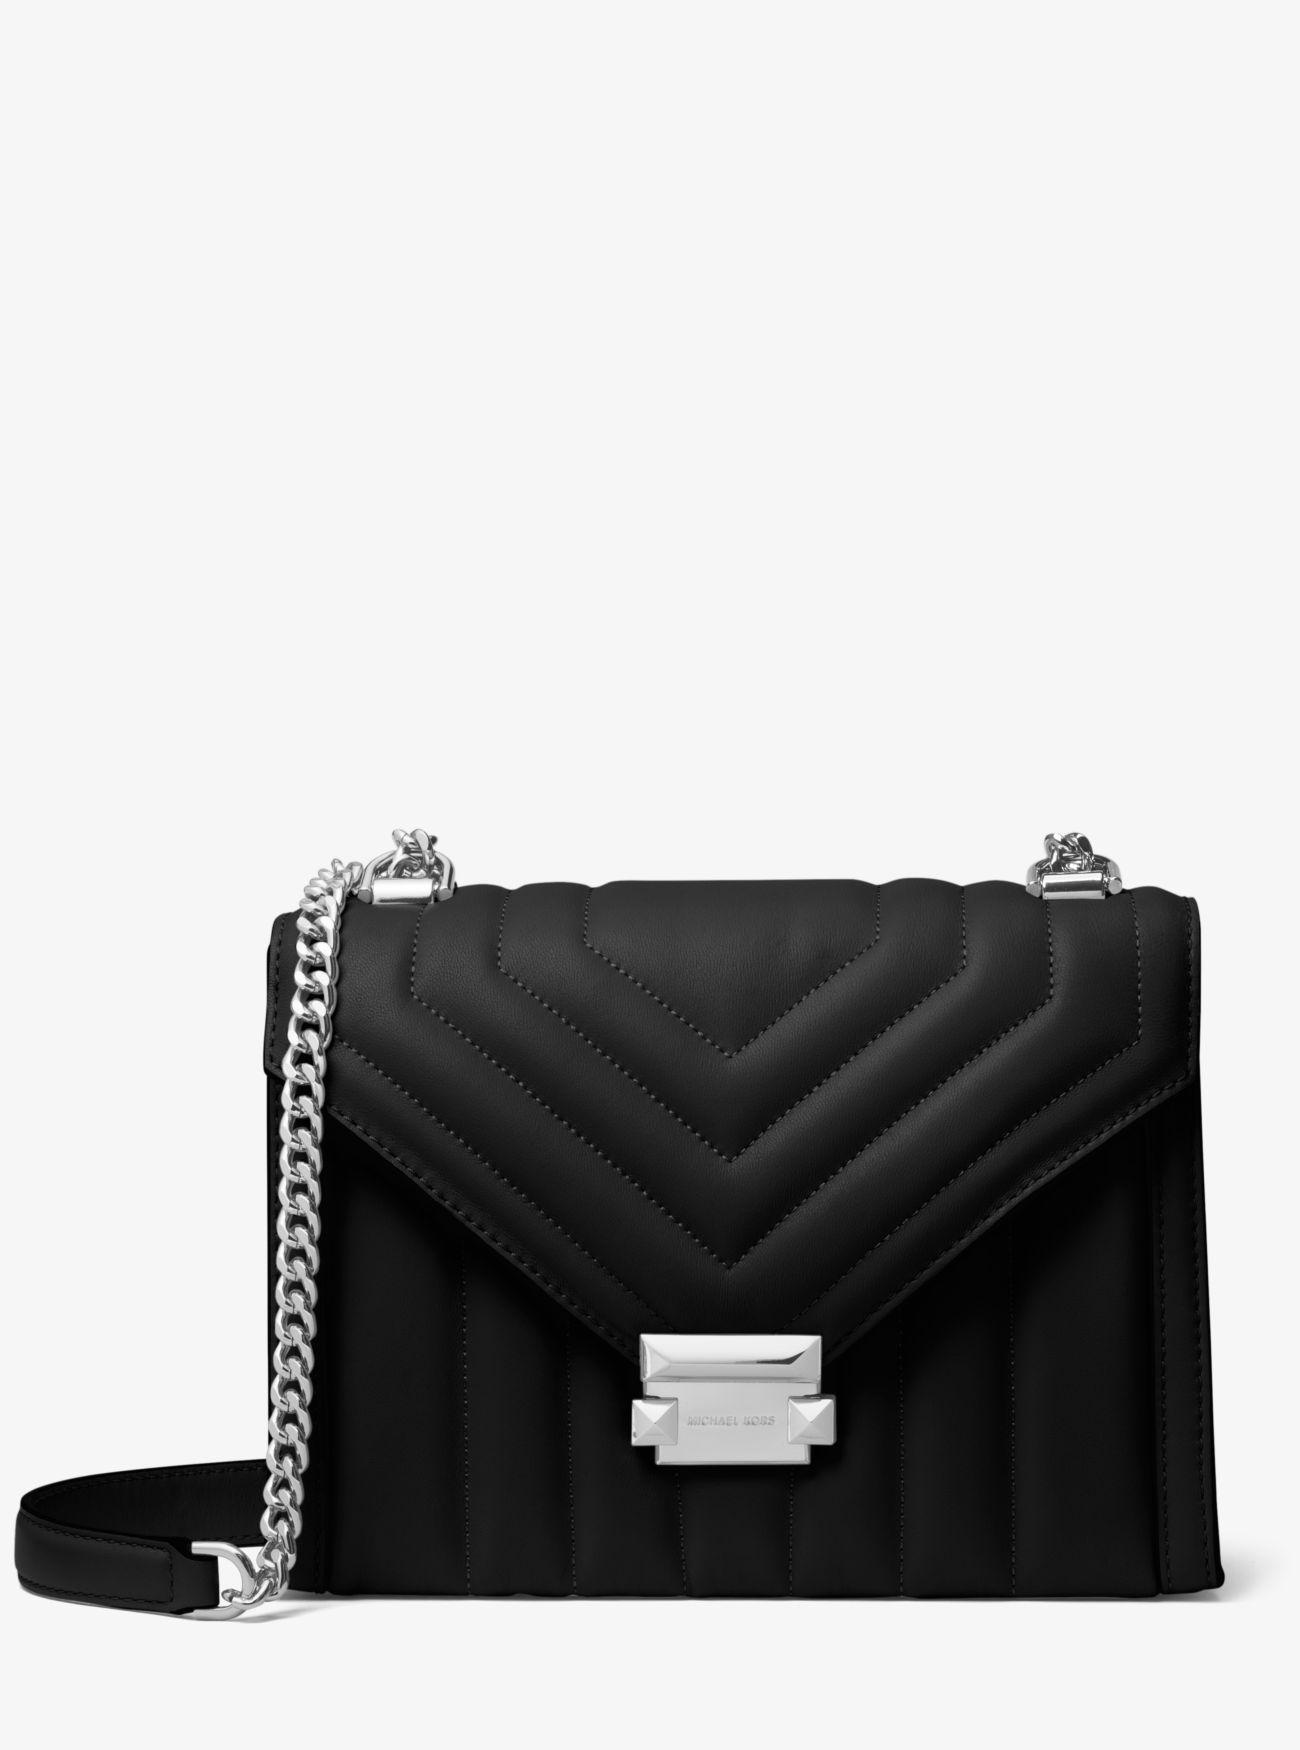 Michael Kors Whitney Small Quilted Leather Convertible Shoulder Bag in Black - Save 28% - Lyst